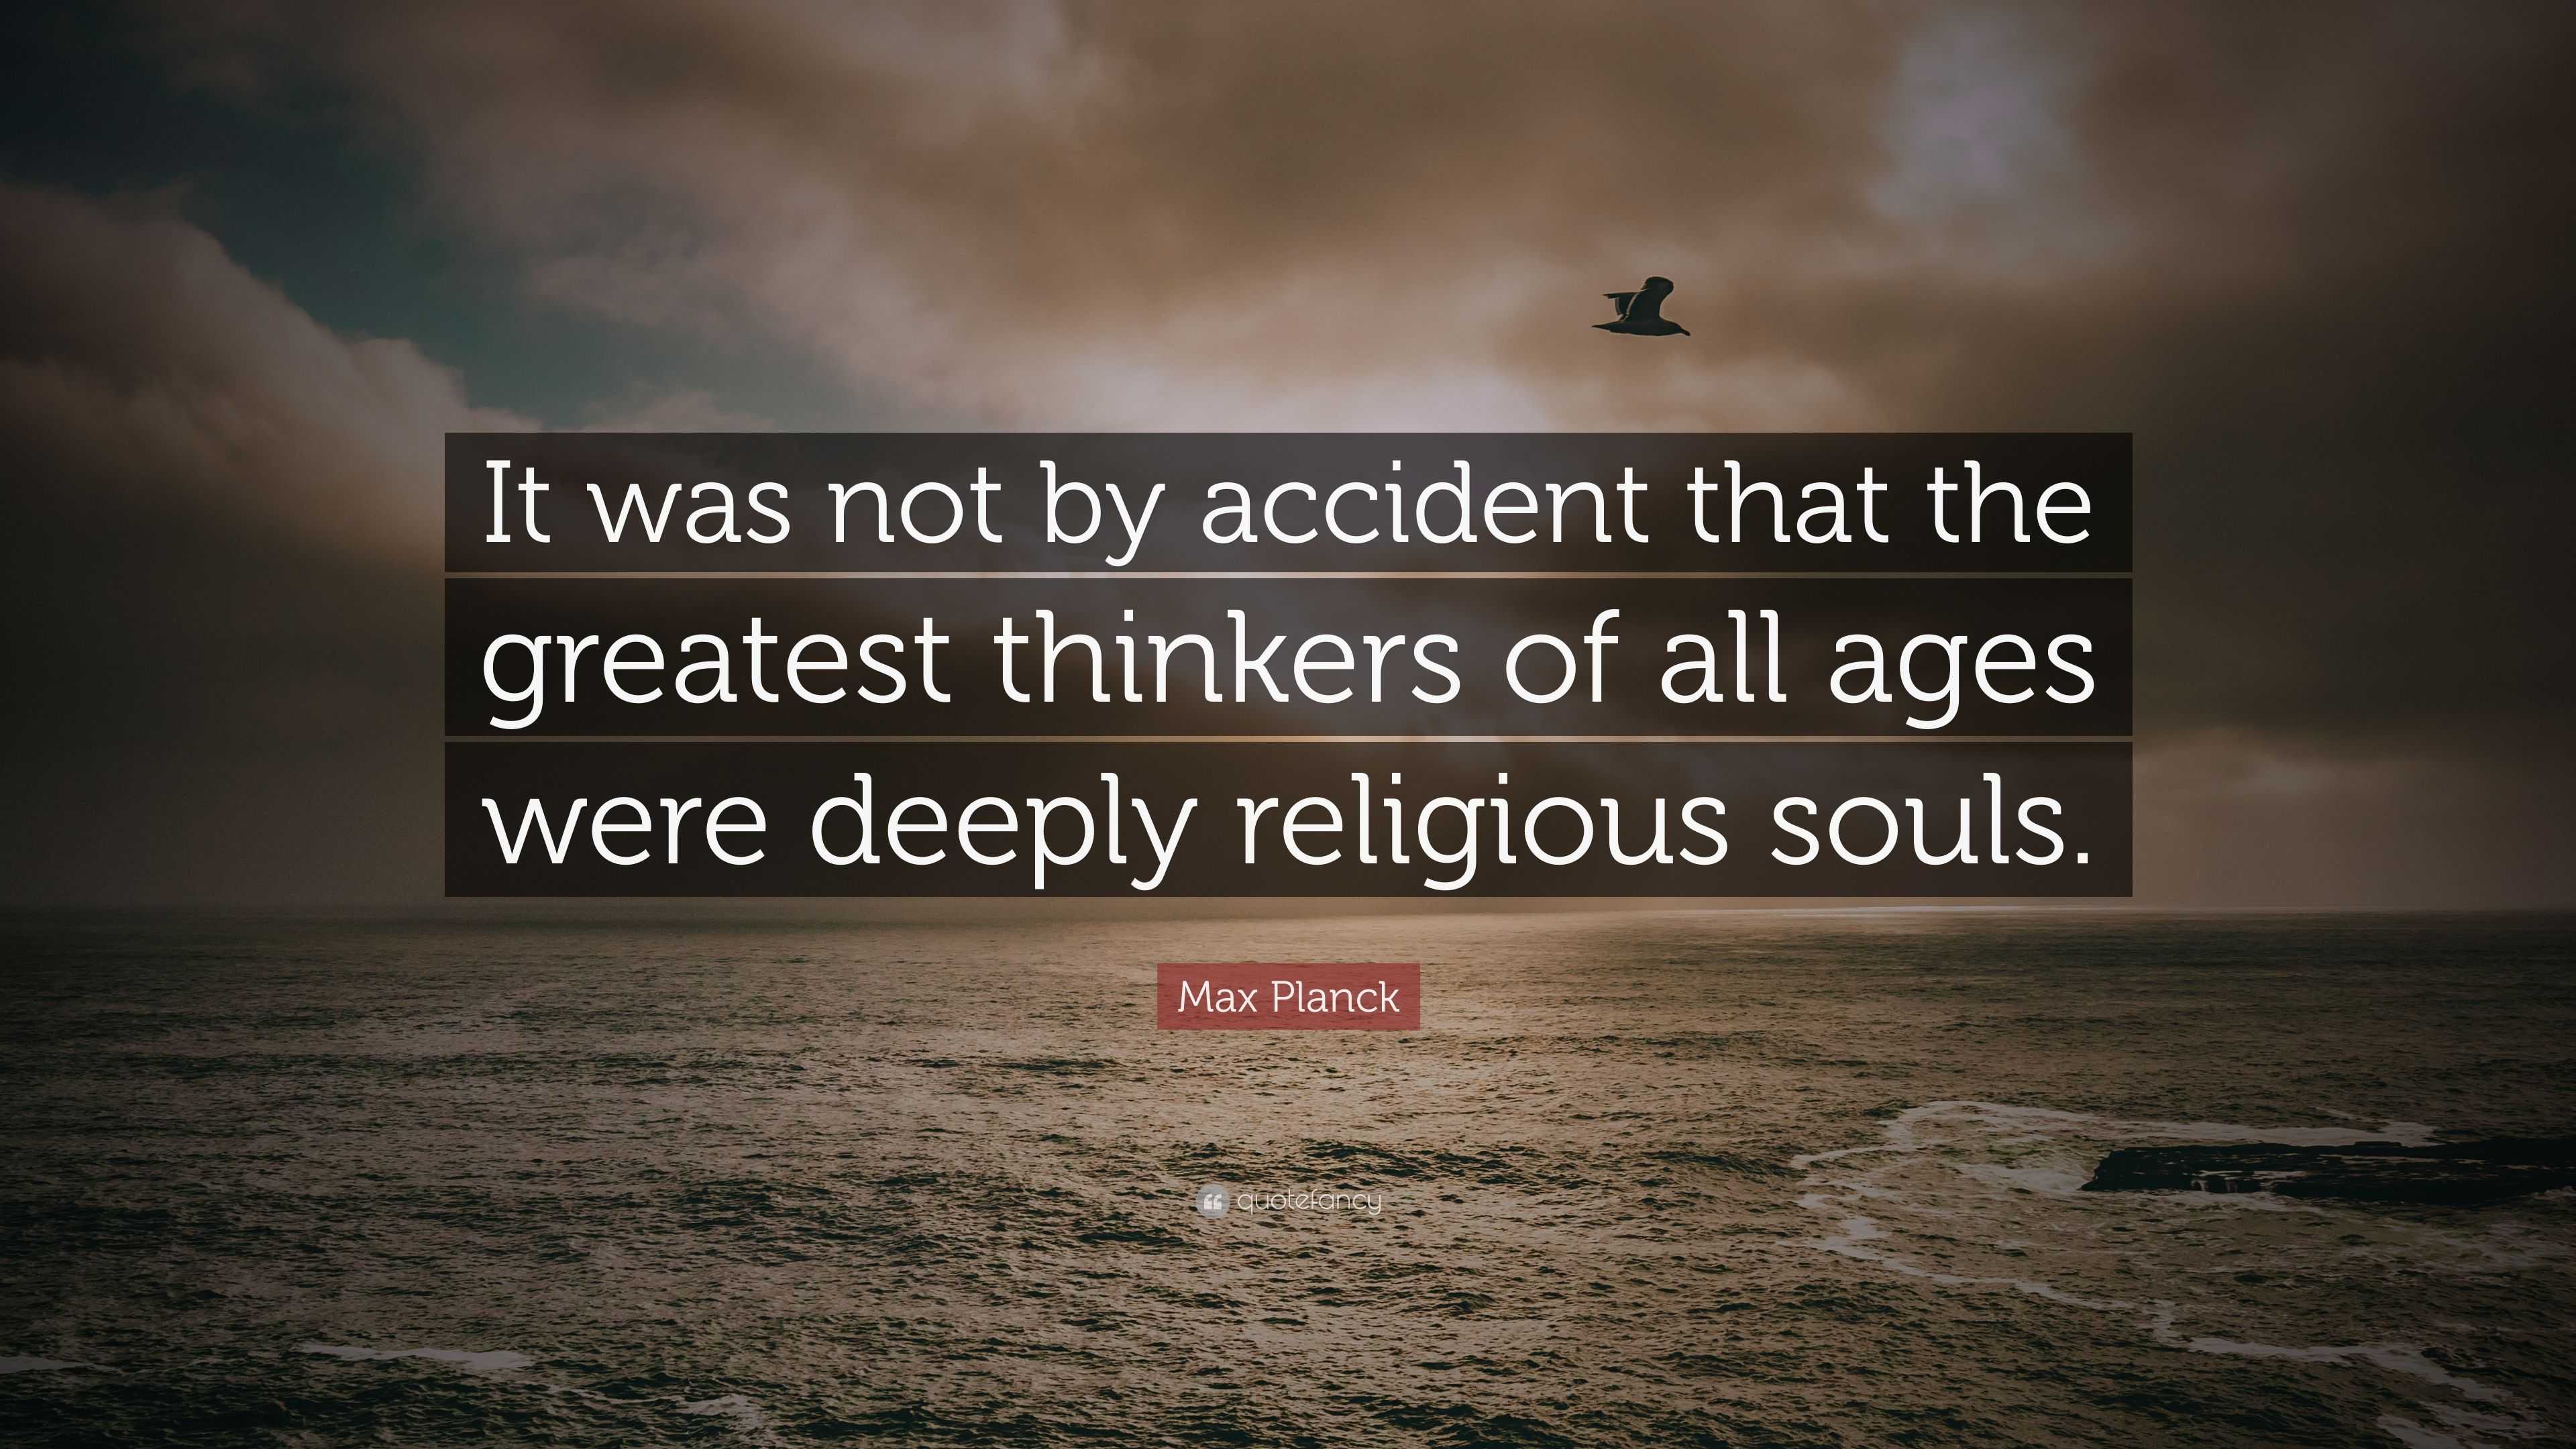 Max Planck Quote: “It was not by accident that the greatest thinkers of